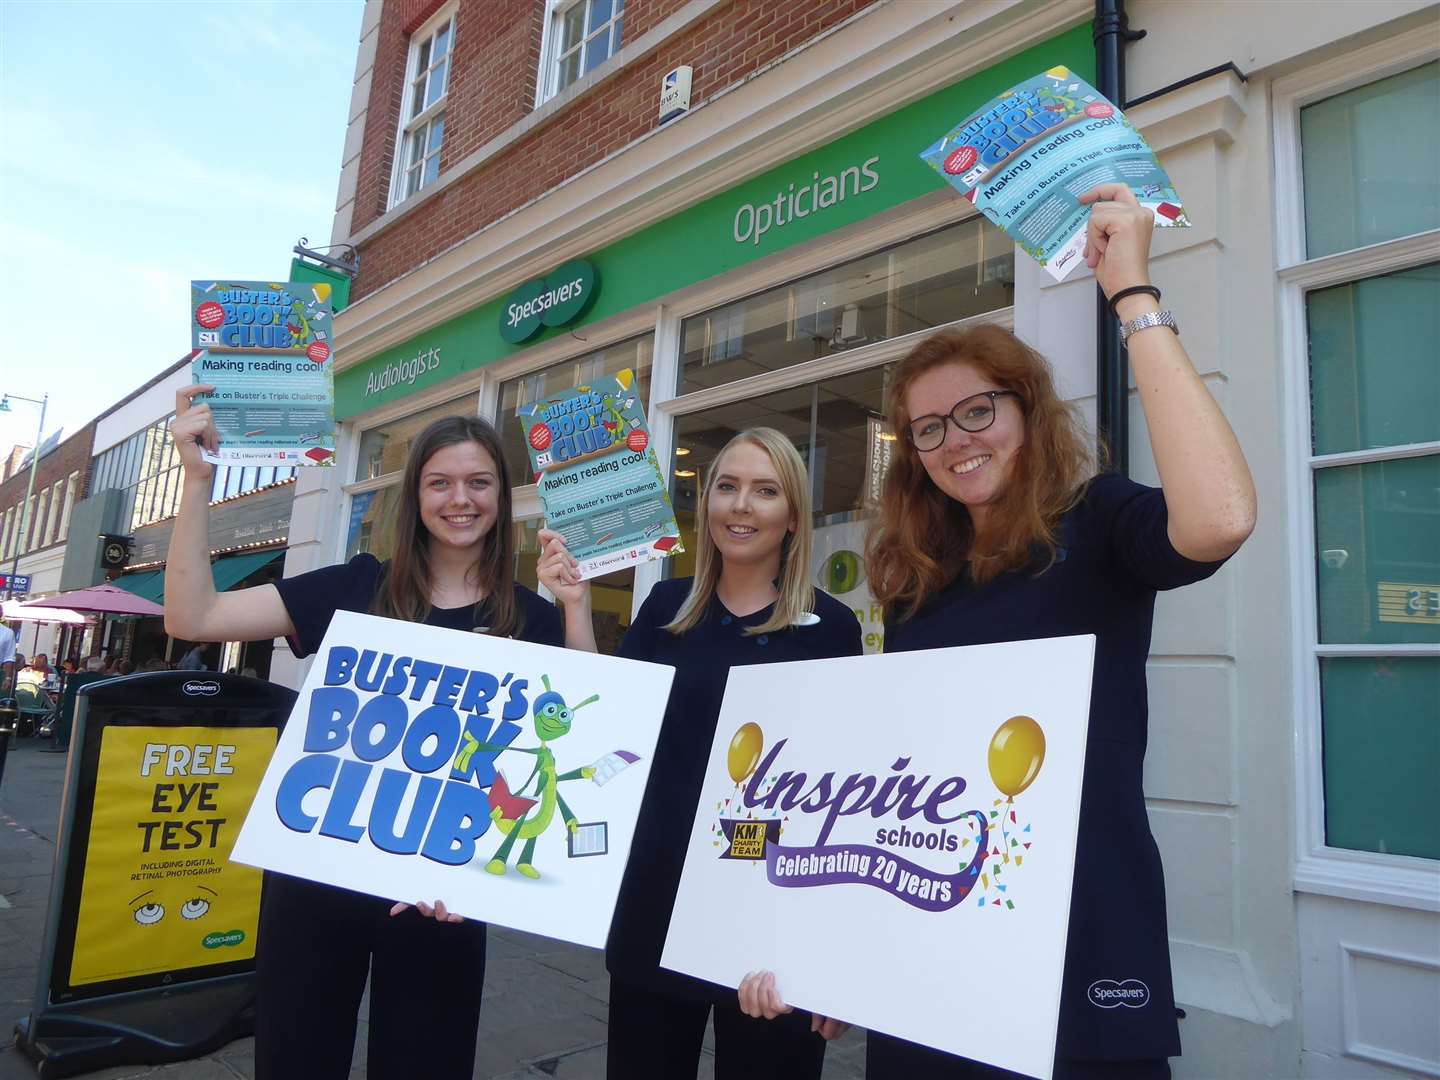 Aine Tainsh, Chloe McGregor and Jess Homes of Specsavers Canterbury branch promote Busters Book Club. (16017387)